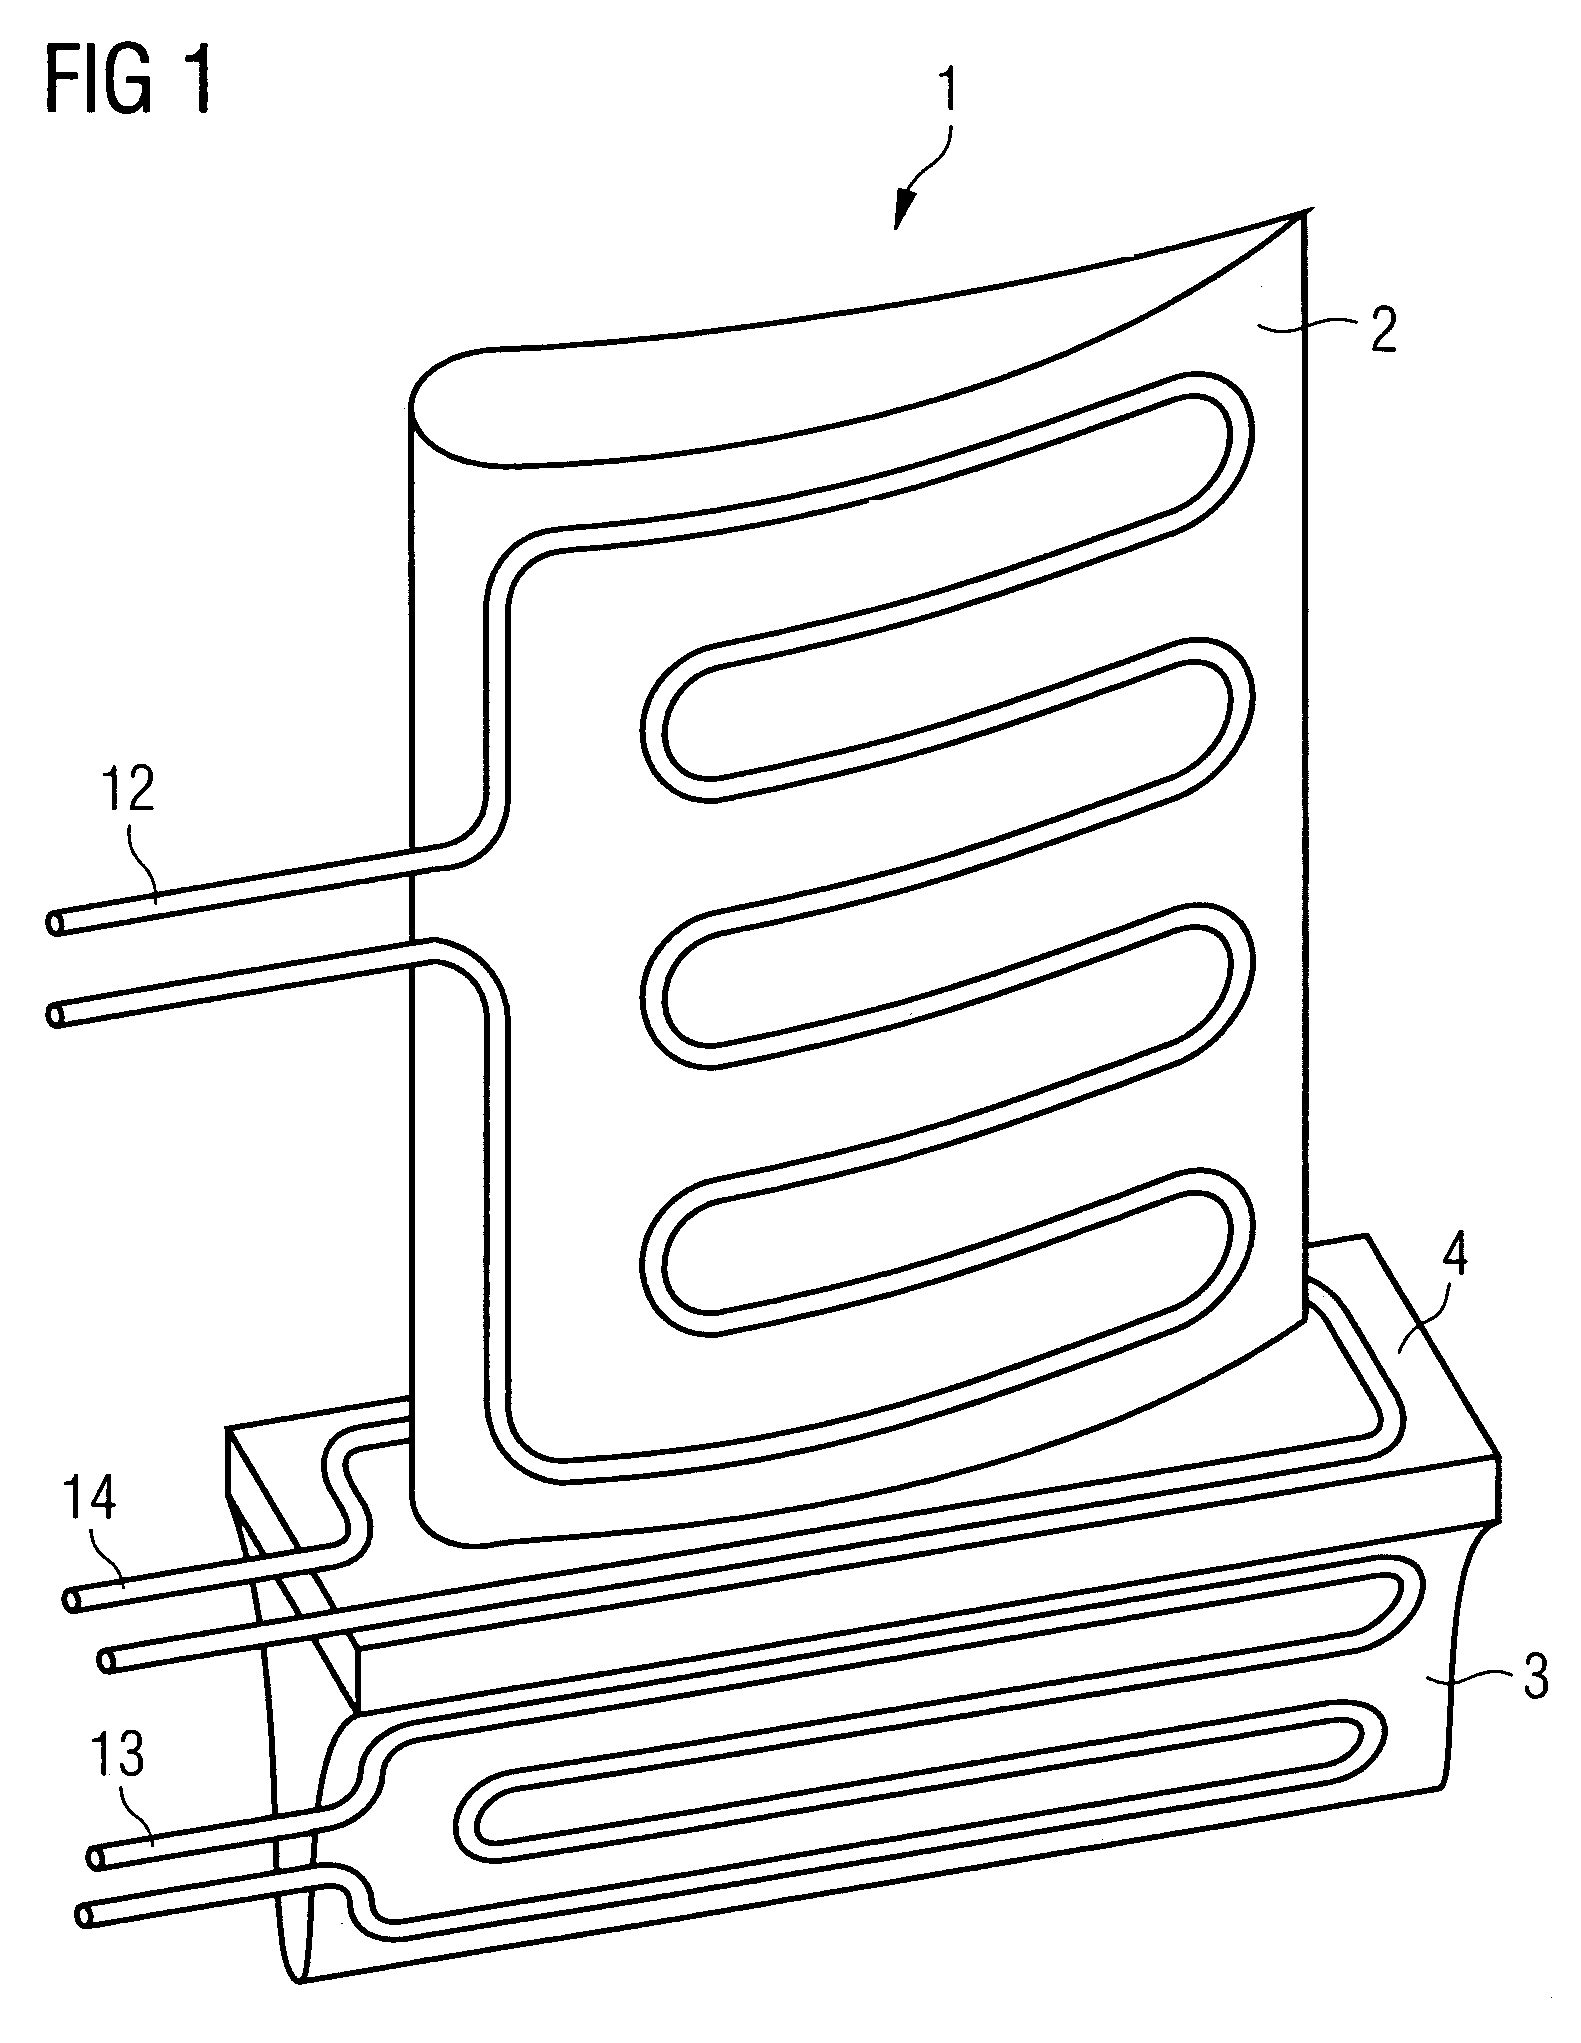 Heat treatment method for monocrystalline or directionally solidified structural components